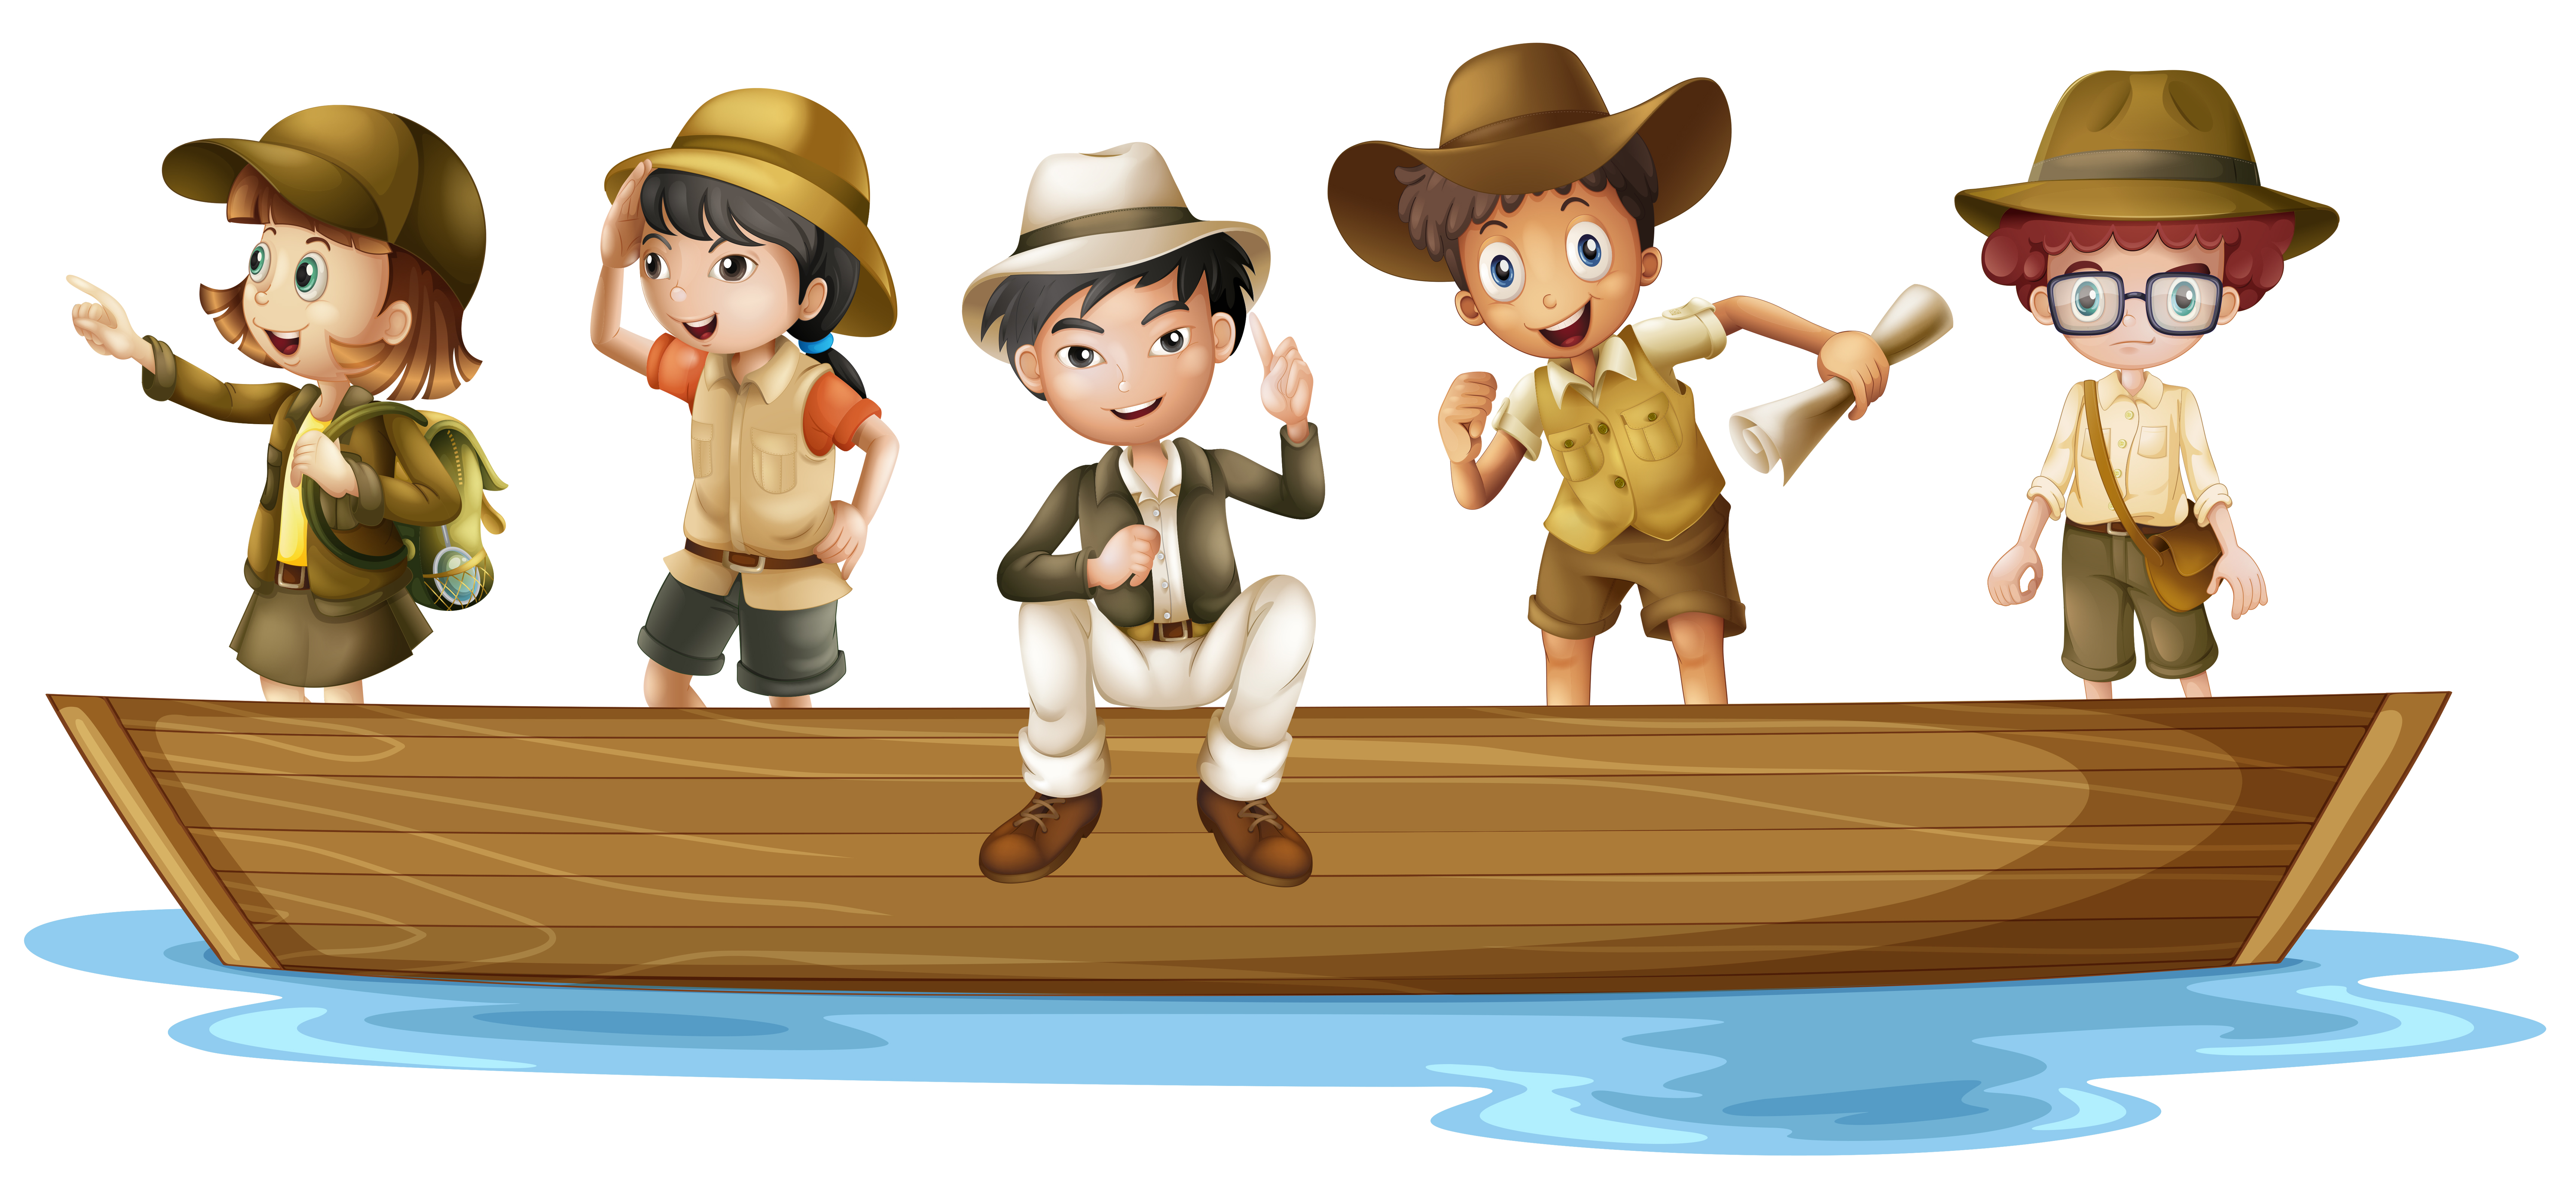 Download the Young explorers 360757 royalty-free Vector from Vecteezy for y...